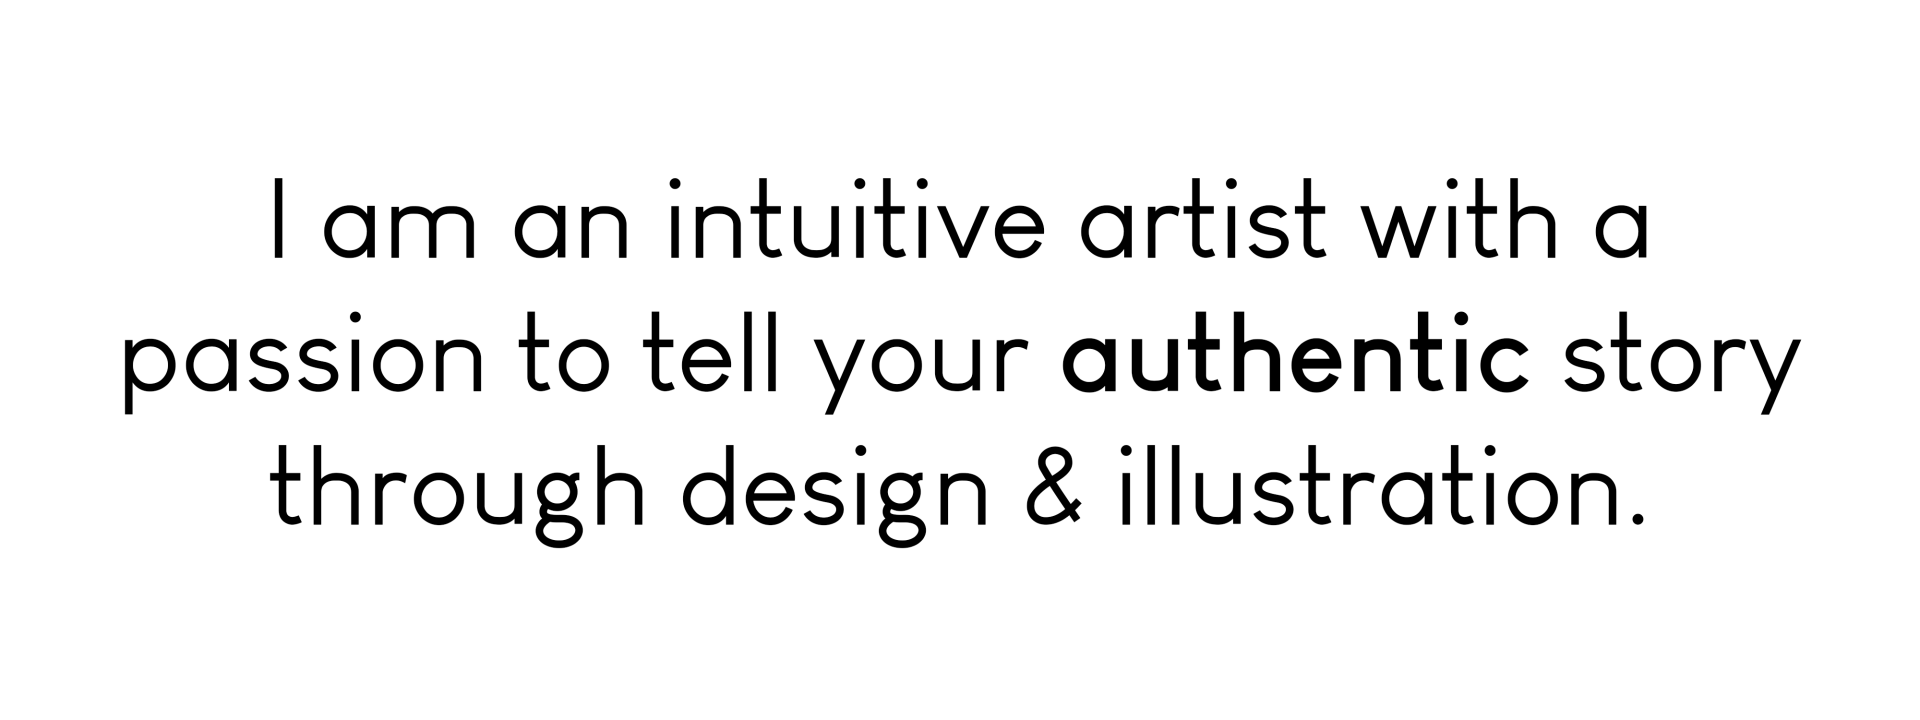 I am an intuitive artist with a passion to tell your authentic story through design & illustration.